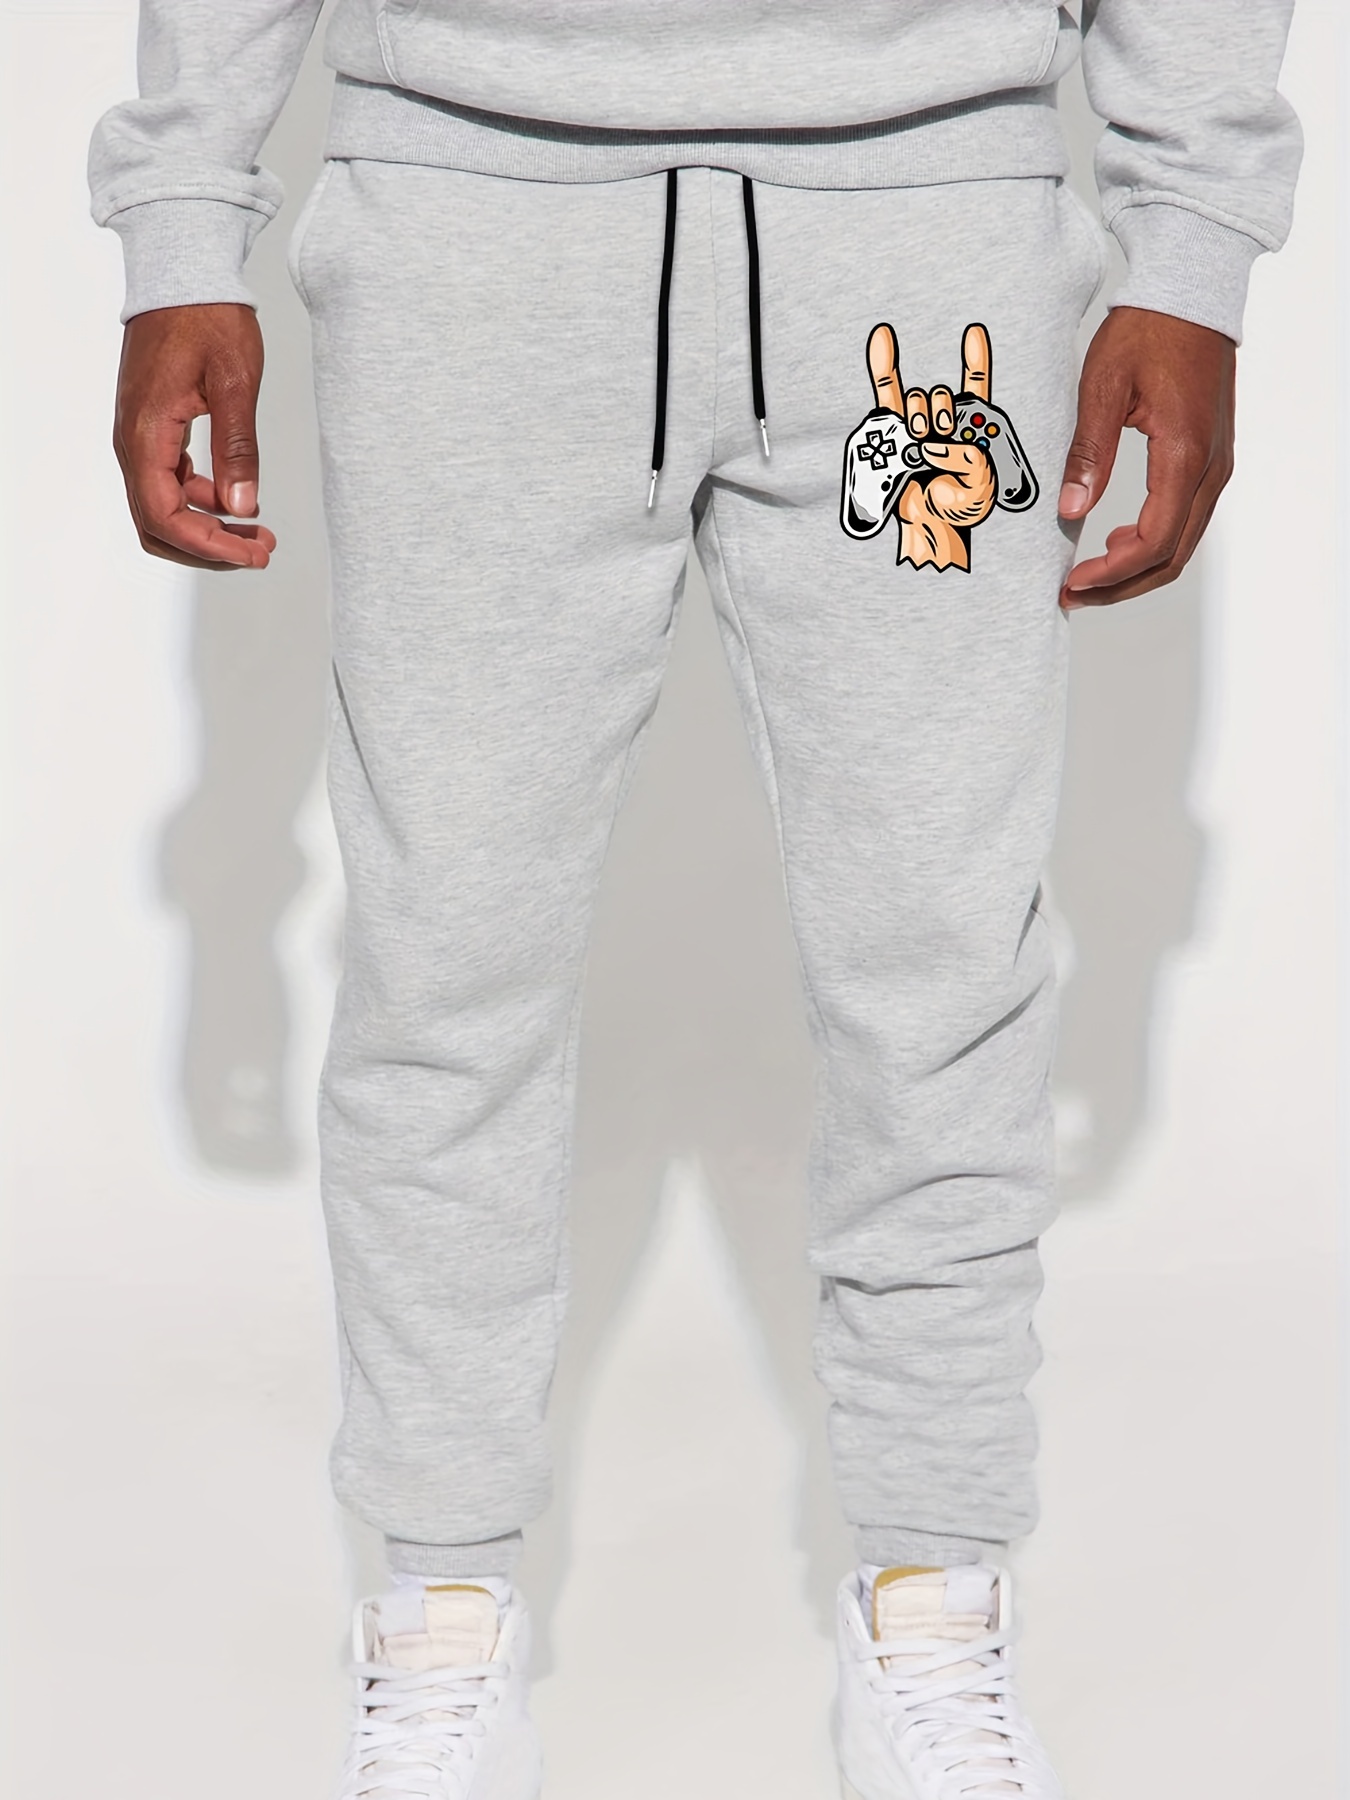 Plus Size Men's Street Style Casual Sports Drawstring Sweat Pants With  Pockets & Graphic Print For Big And Tall Males